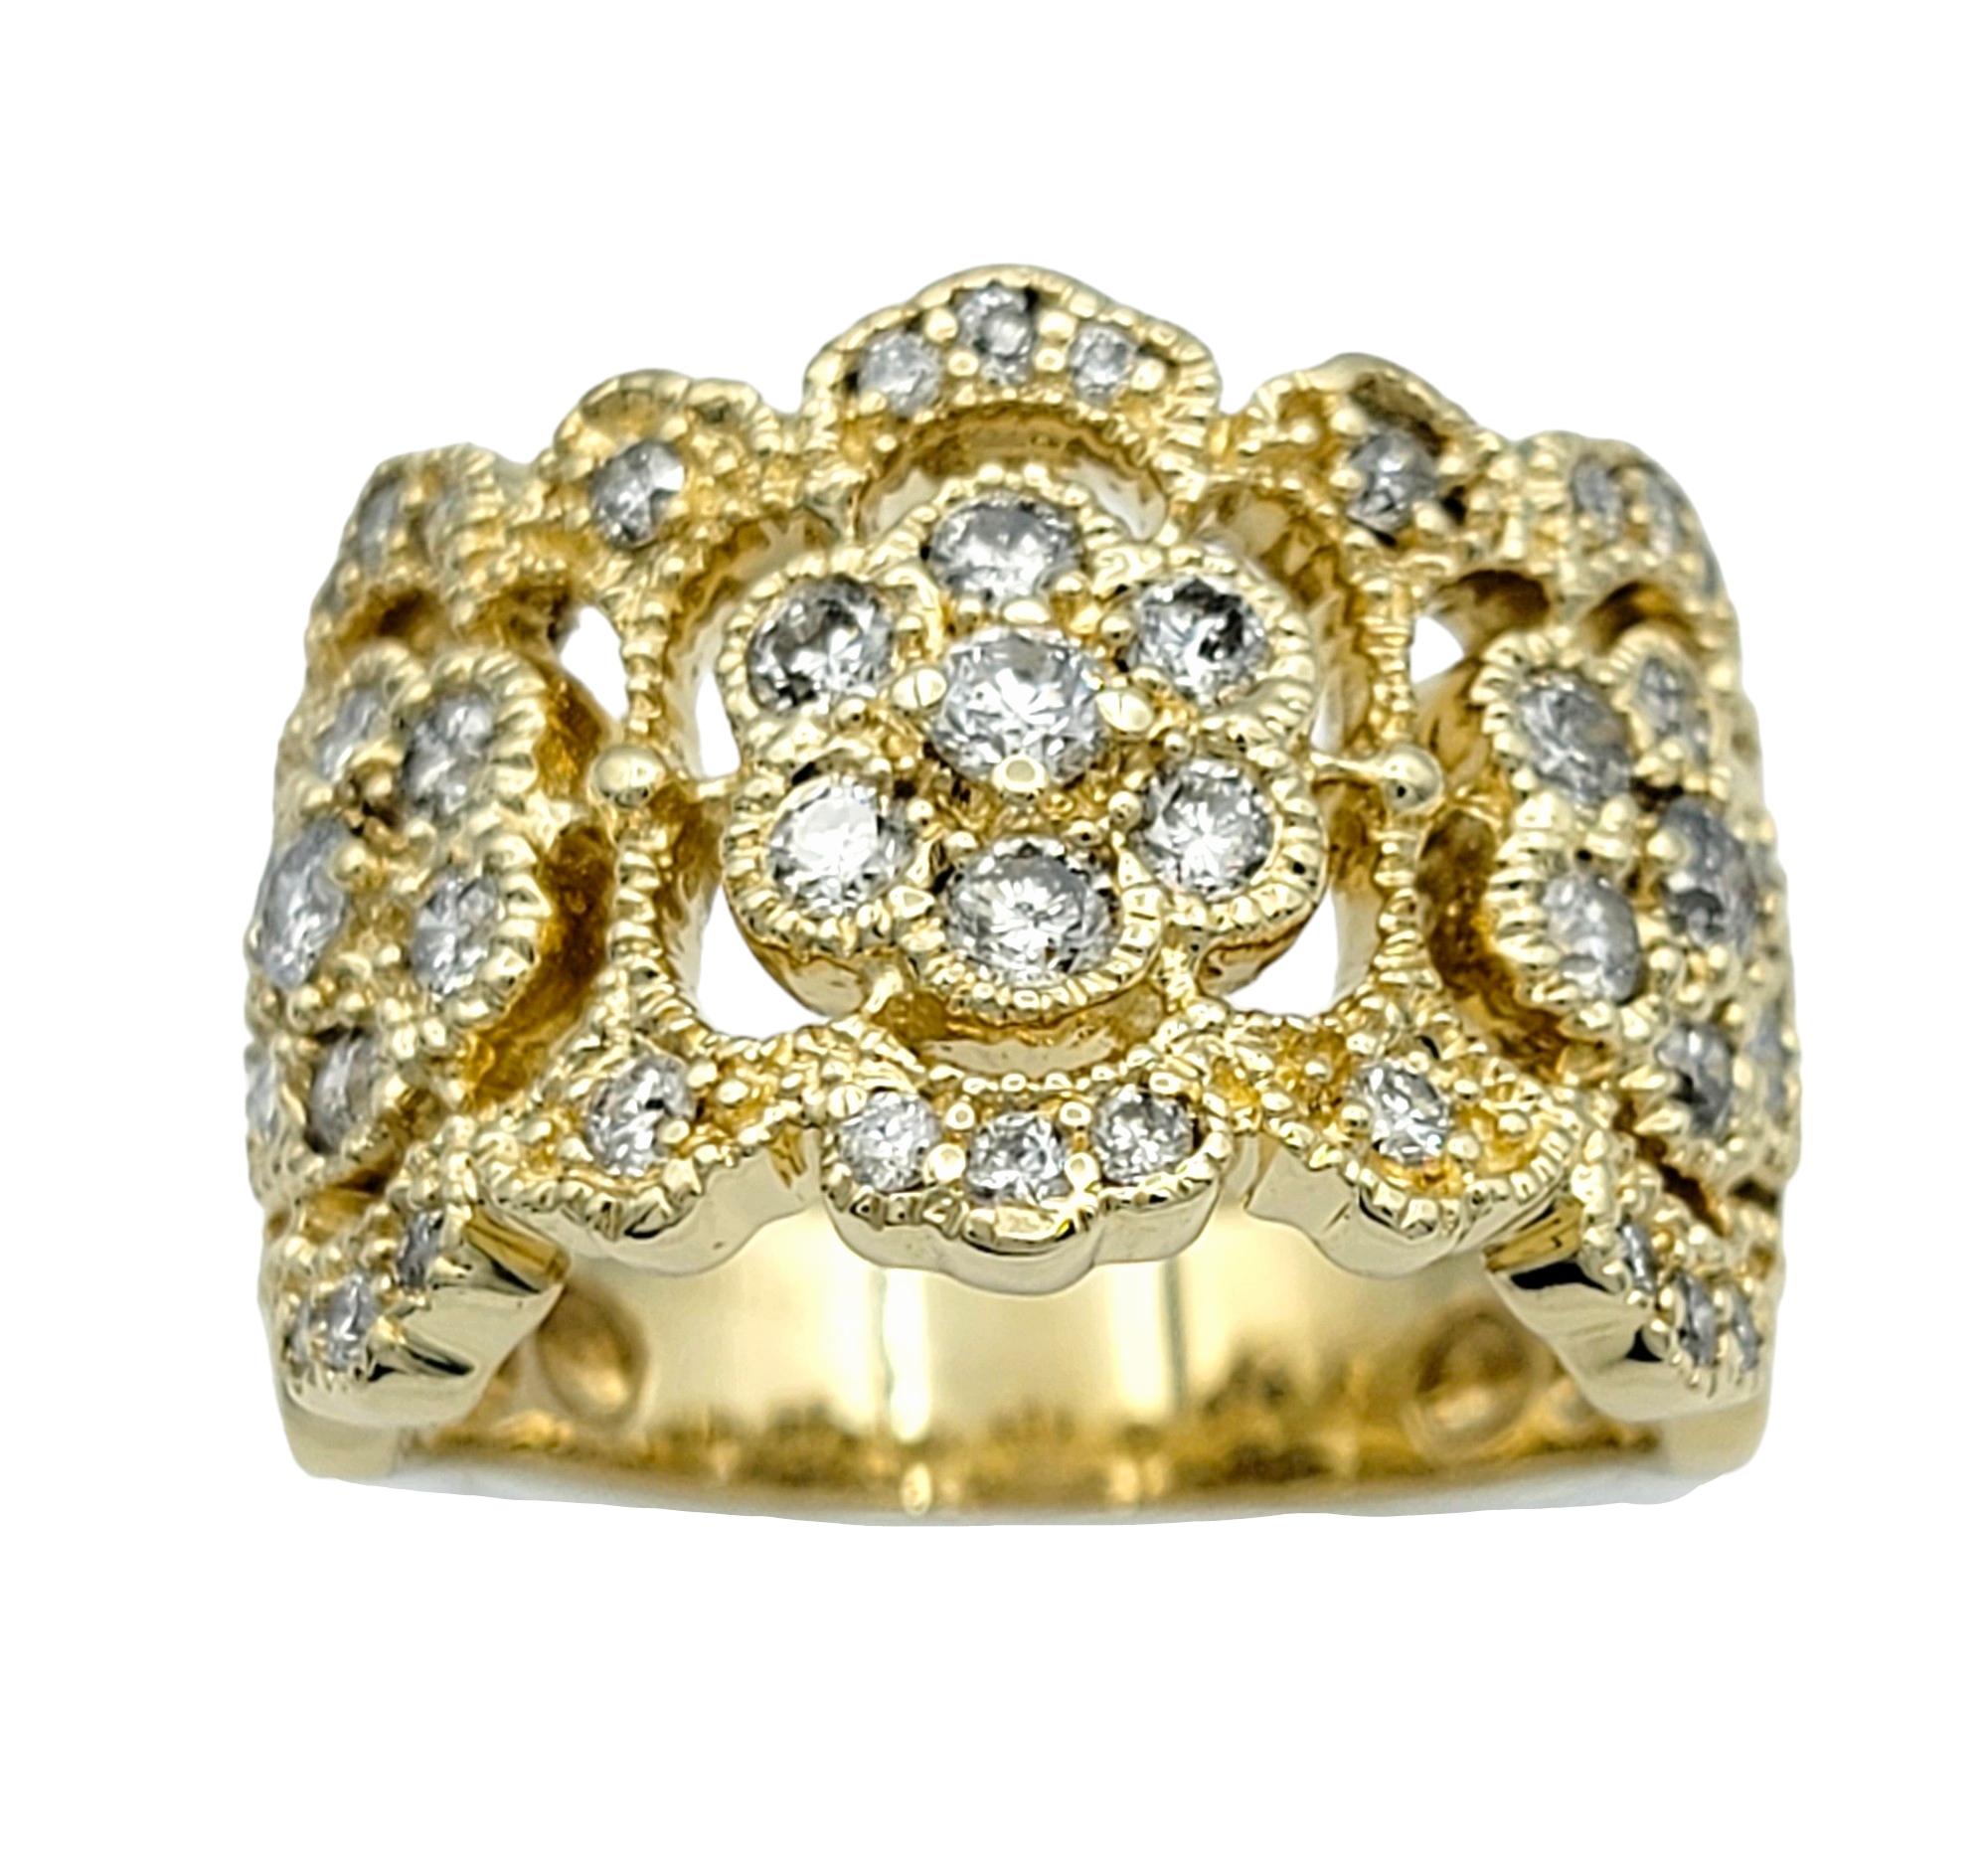 Ring Size: 7.5

The Effy band ring, resplendent in radiant 14 karat yellow gold, is a stunning testament to elegance and sophistication. Its design features a captivating flower motif cut-out pattern that exudes timeless charm and beauty. Each